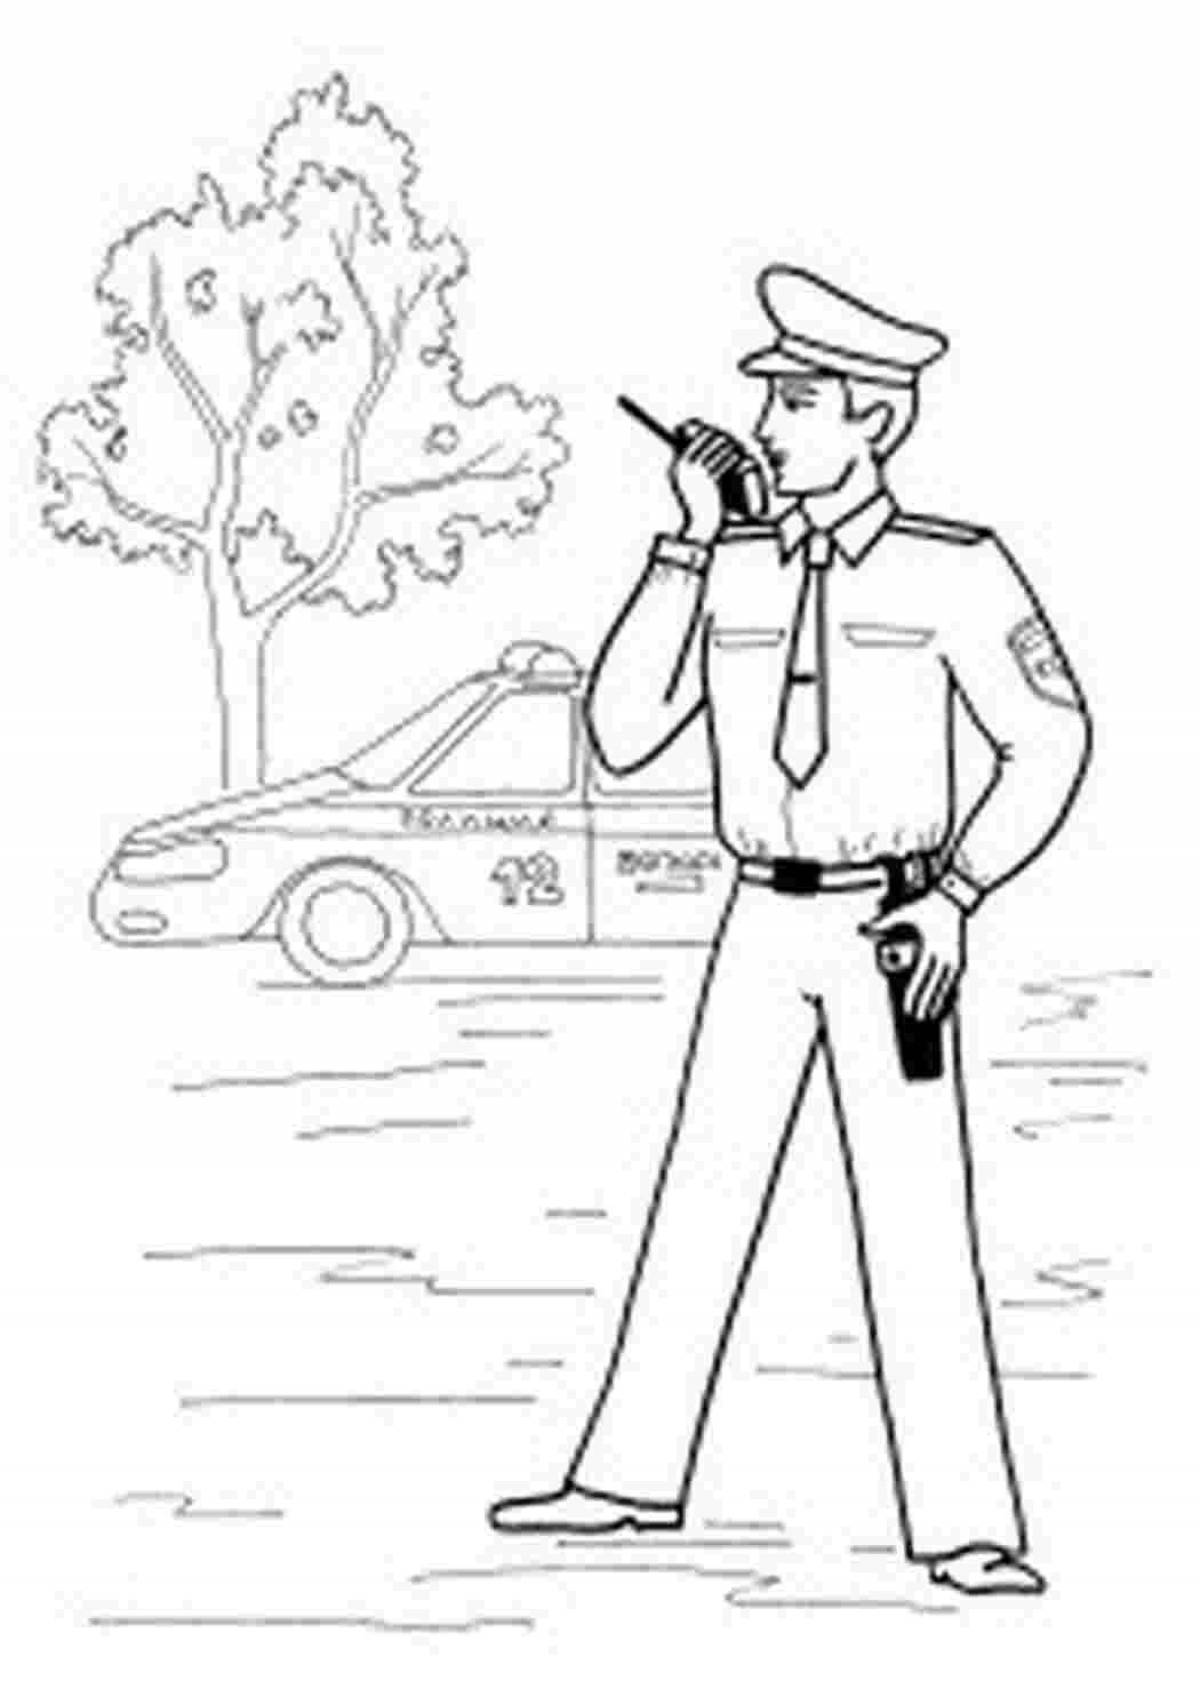 Fun police coloring book for kids